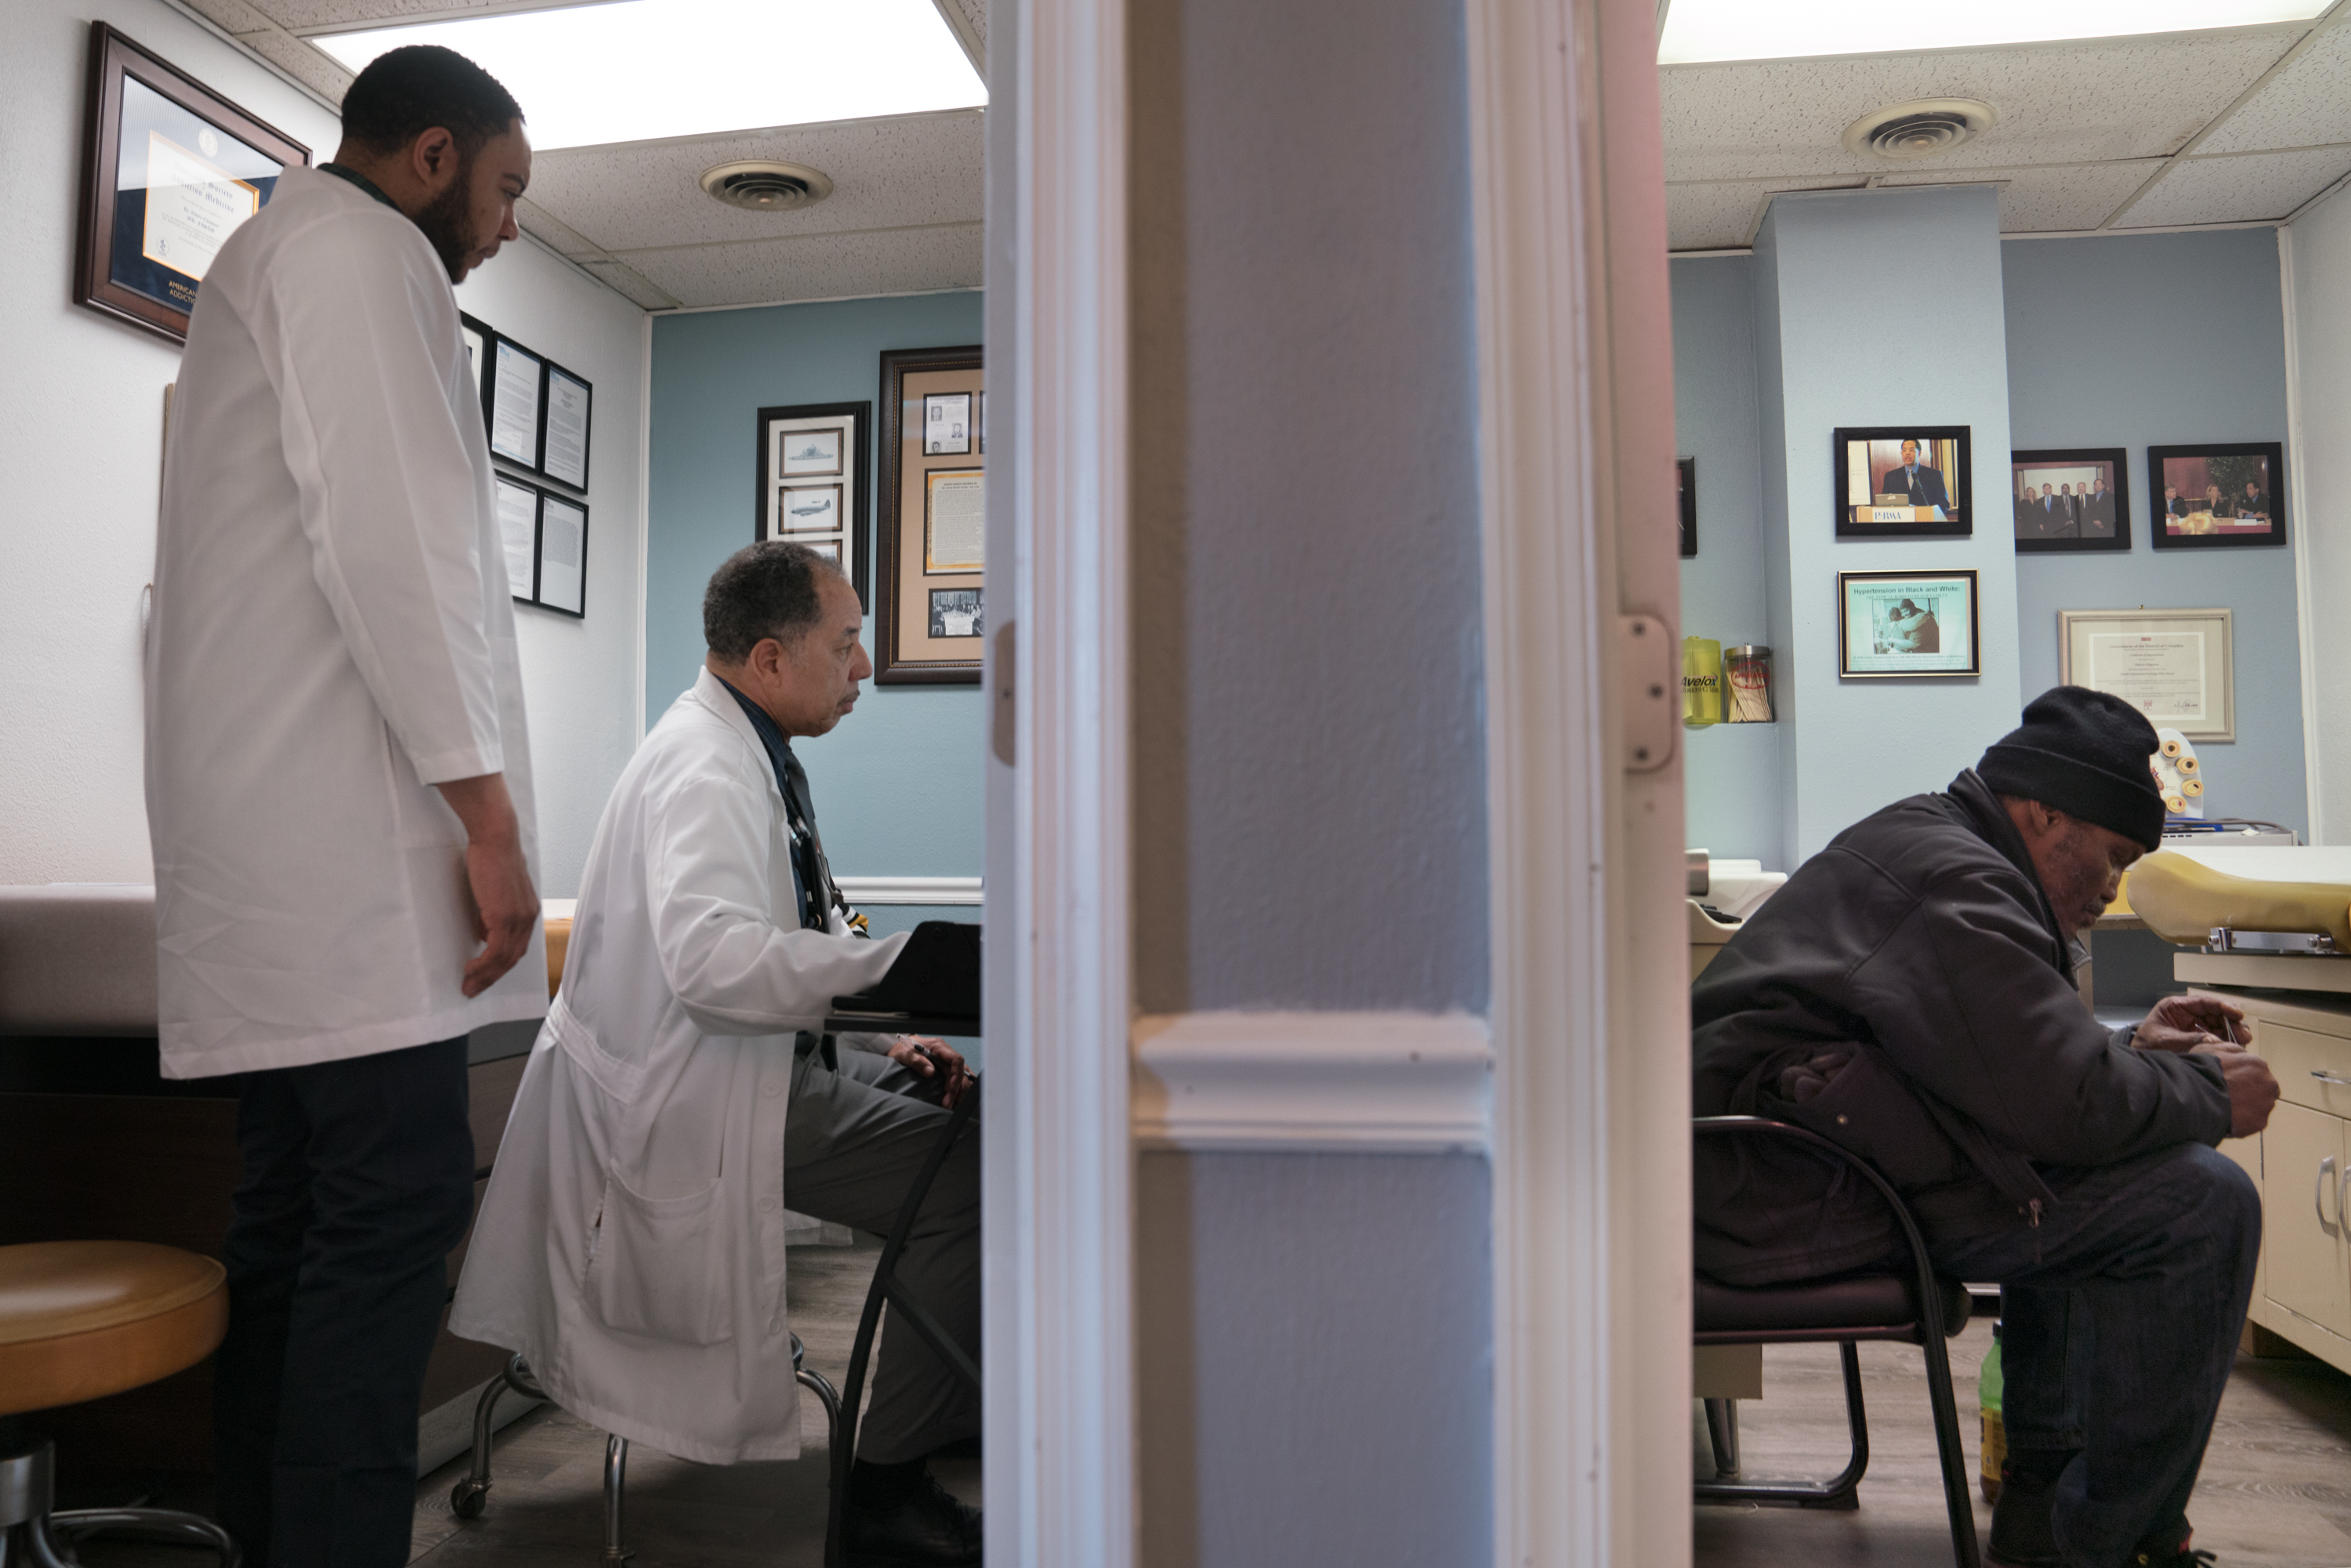 Dr. Scott Whetsell (left) is training with Chapman to better understand how to help the patients that come to the clinic. Gerald A. Goines Sr. (right) waits to see Chapman.
